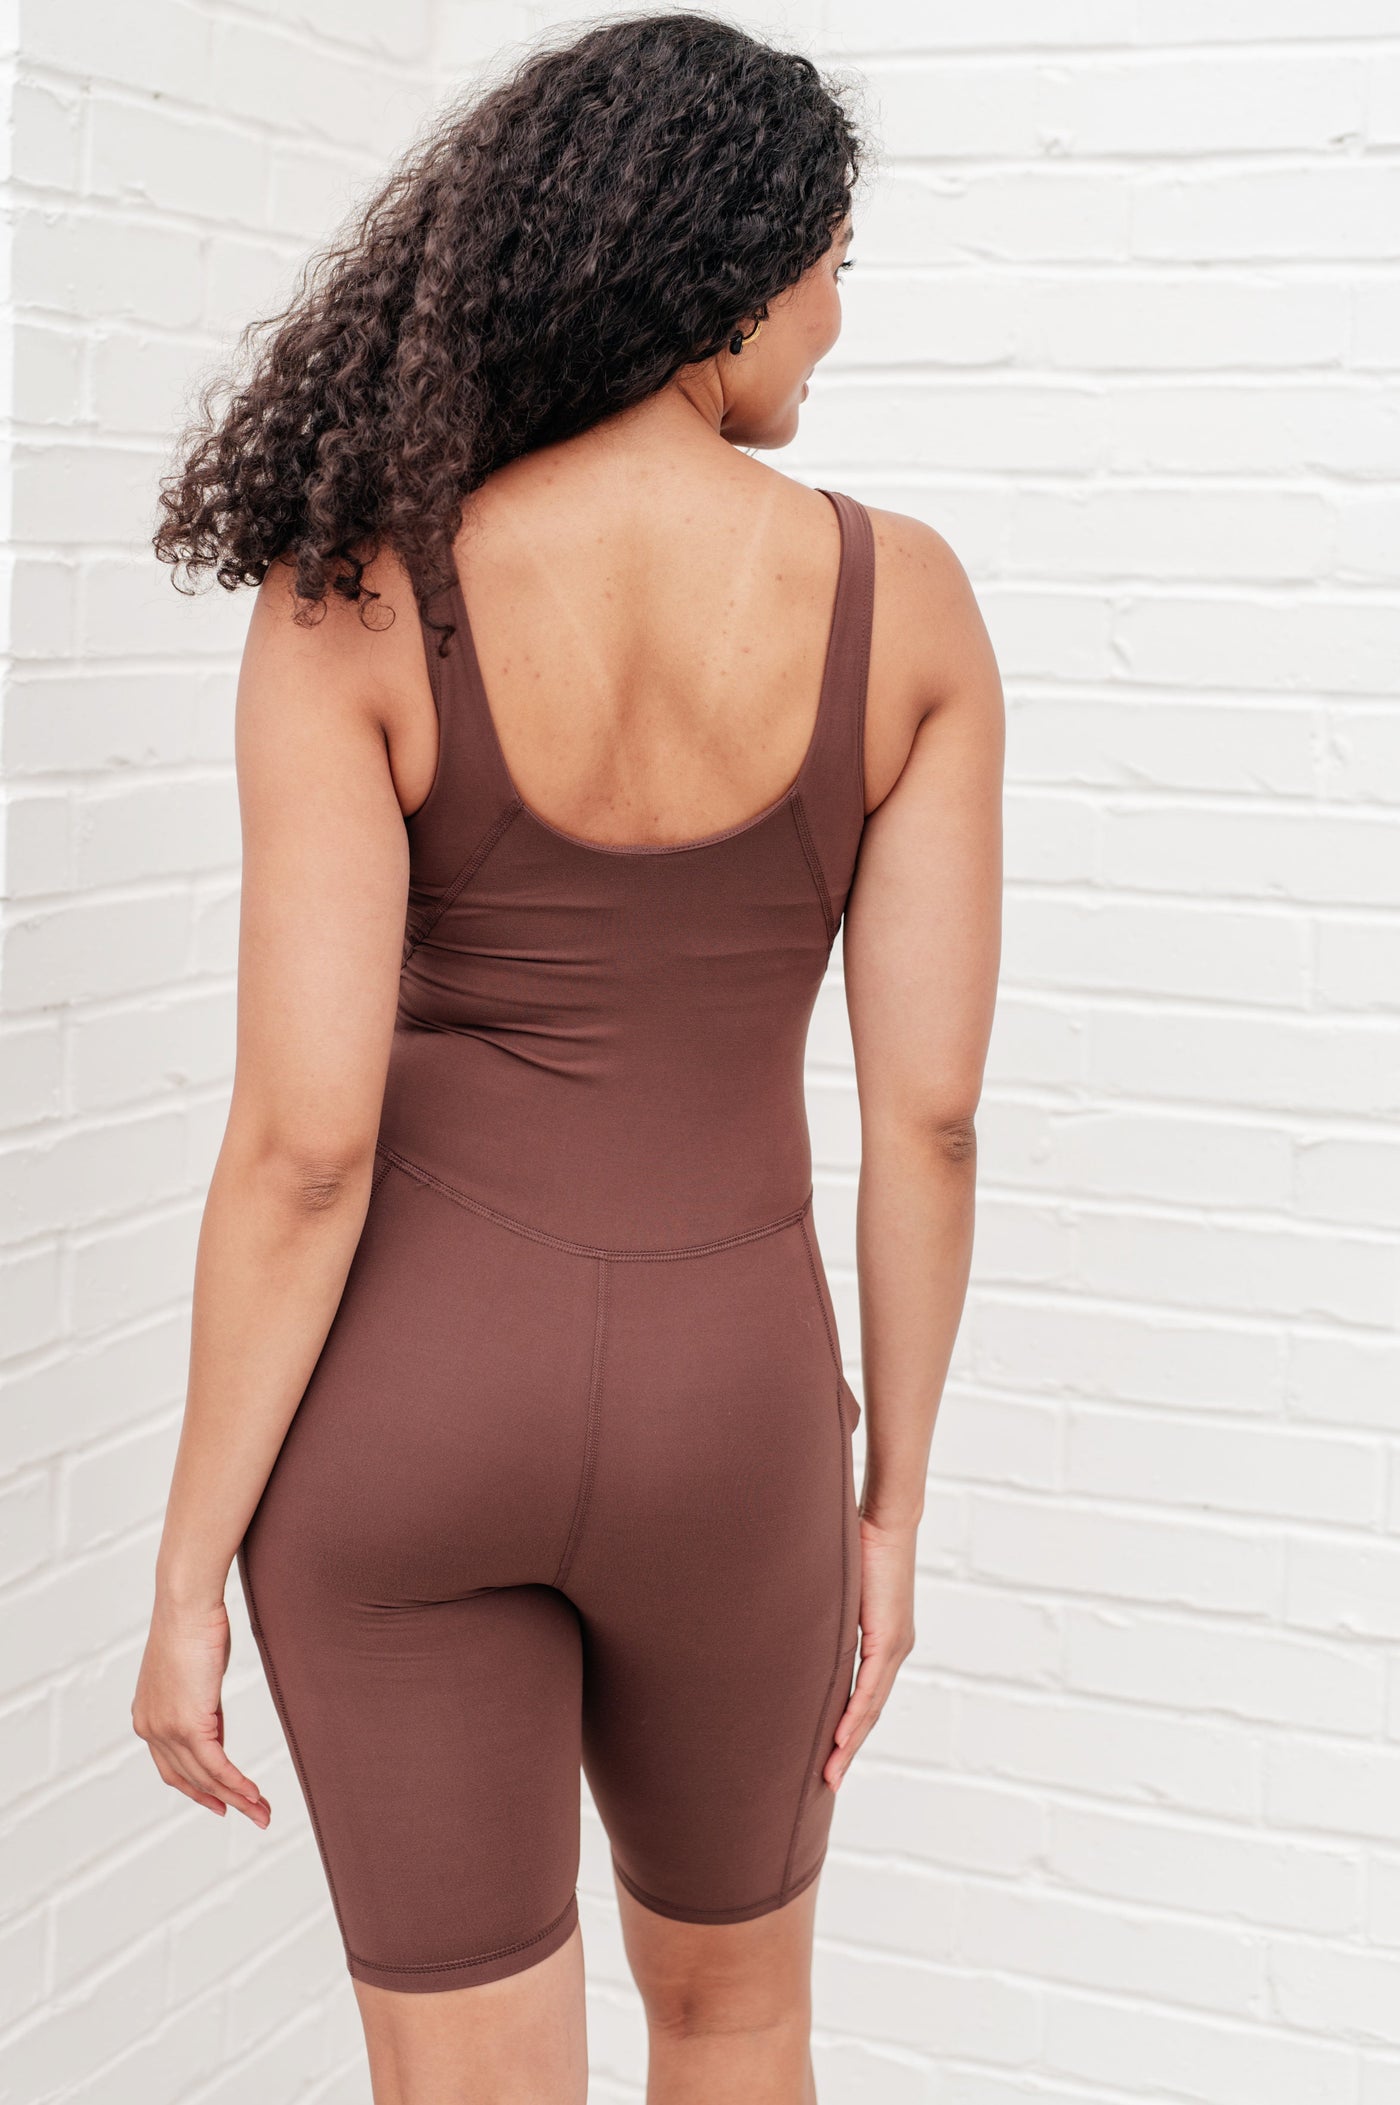 Sun Salutations Body Suit in Java Southern Soul Collectives